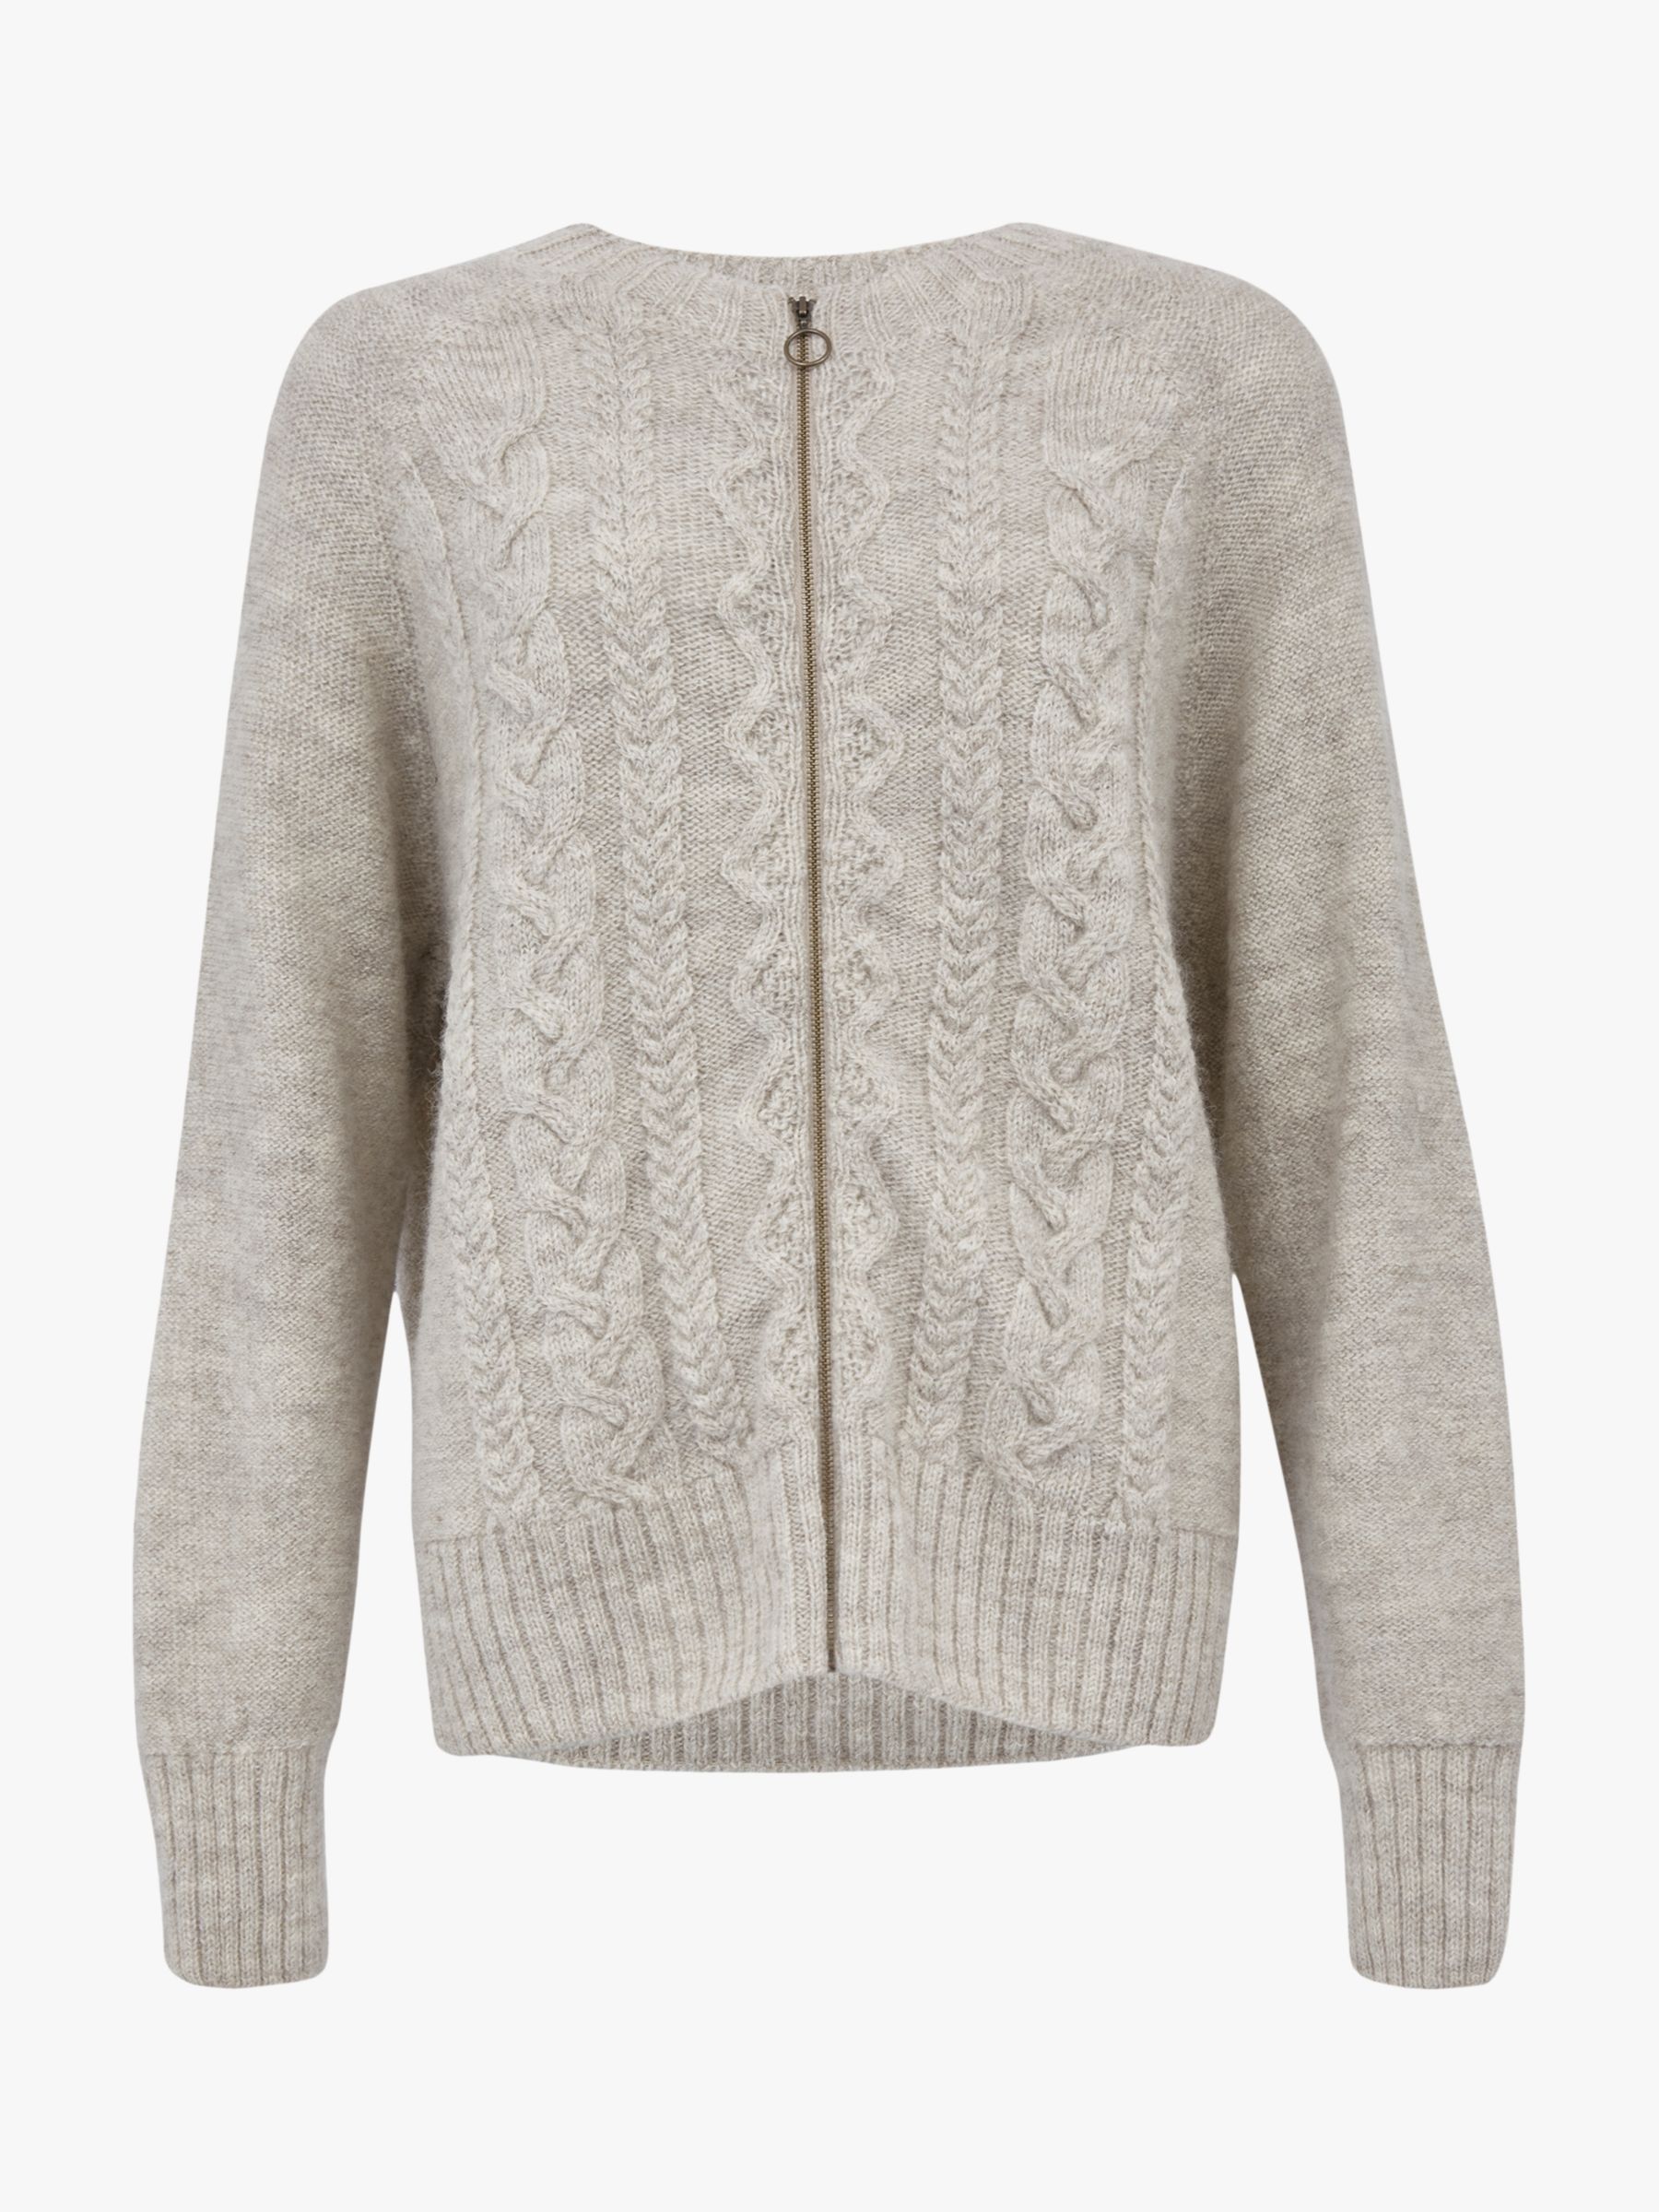 Celtic & Co. British Wool Cable Knit Zip Cardigan, Undyed Taupe, L